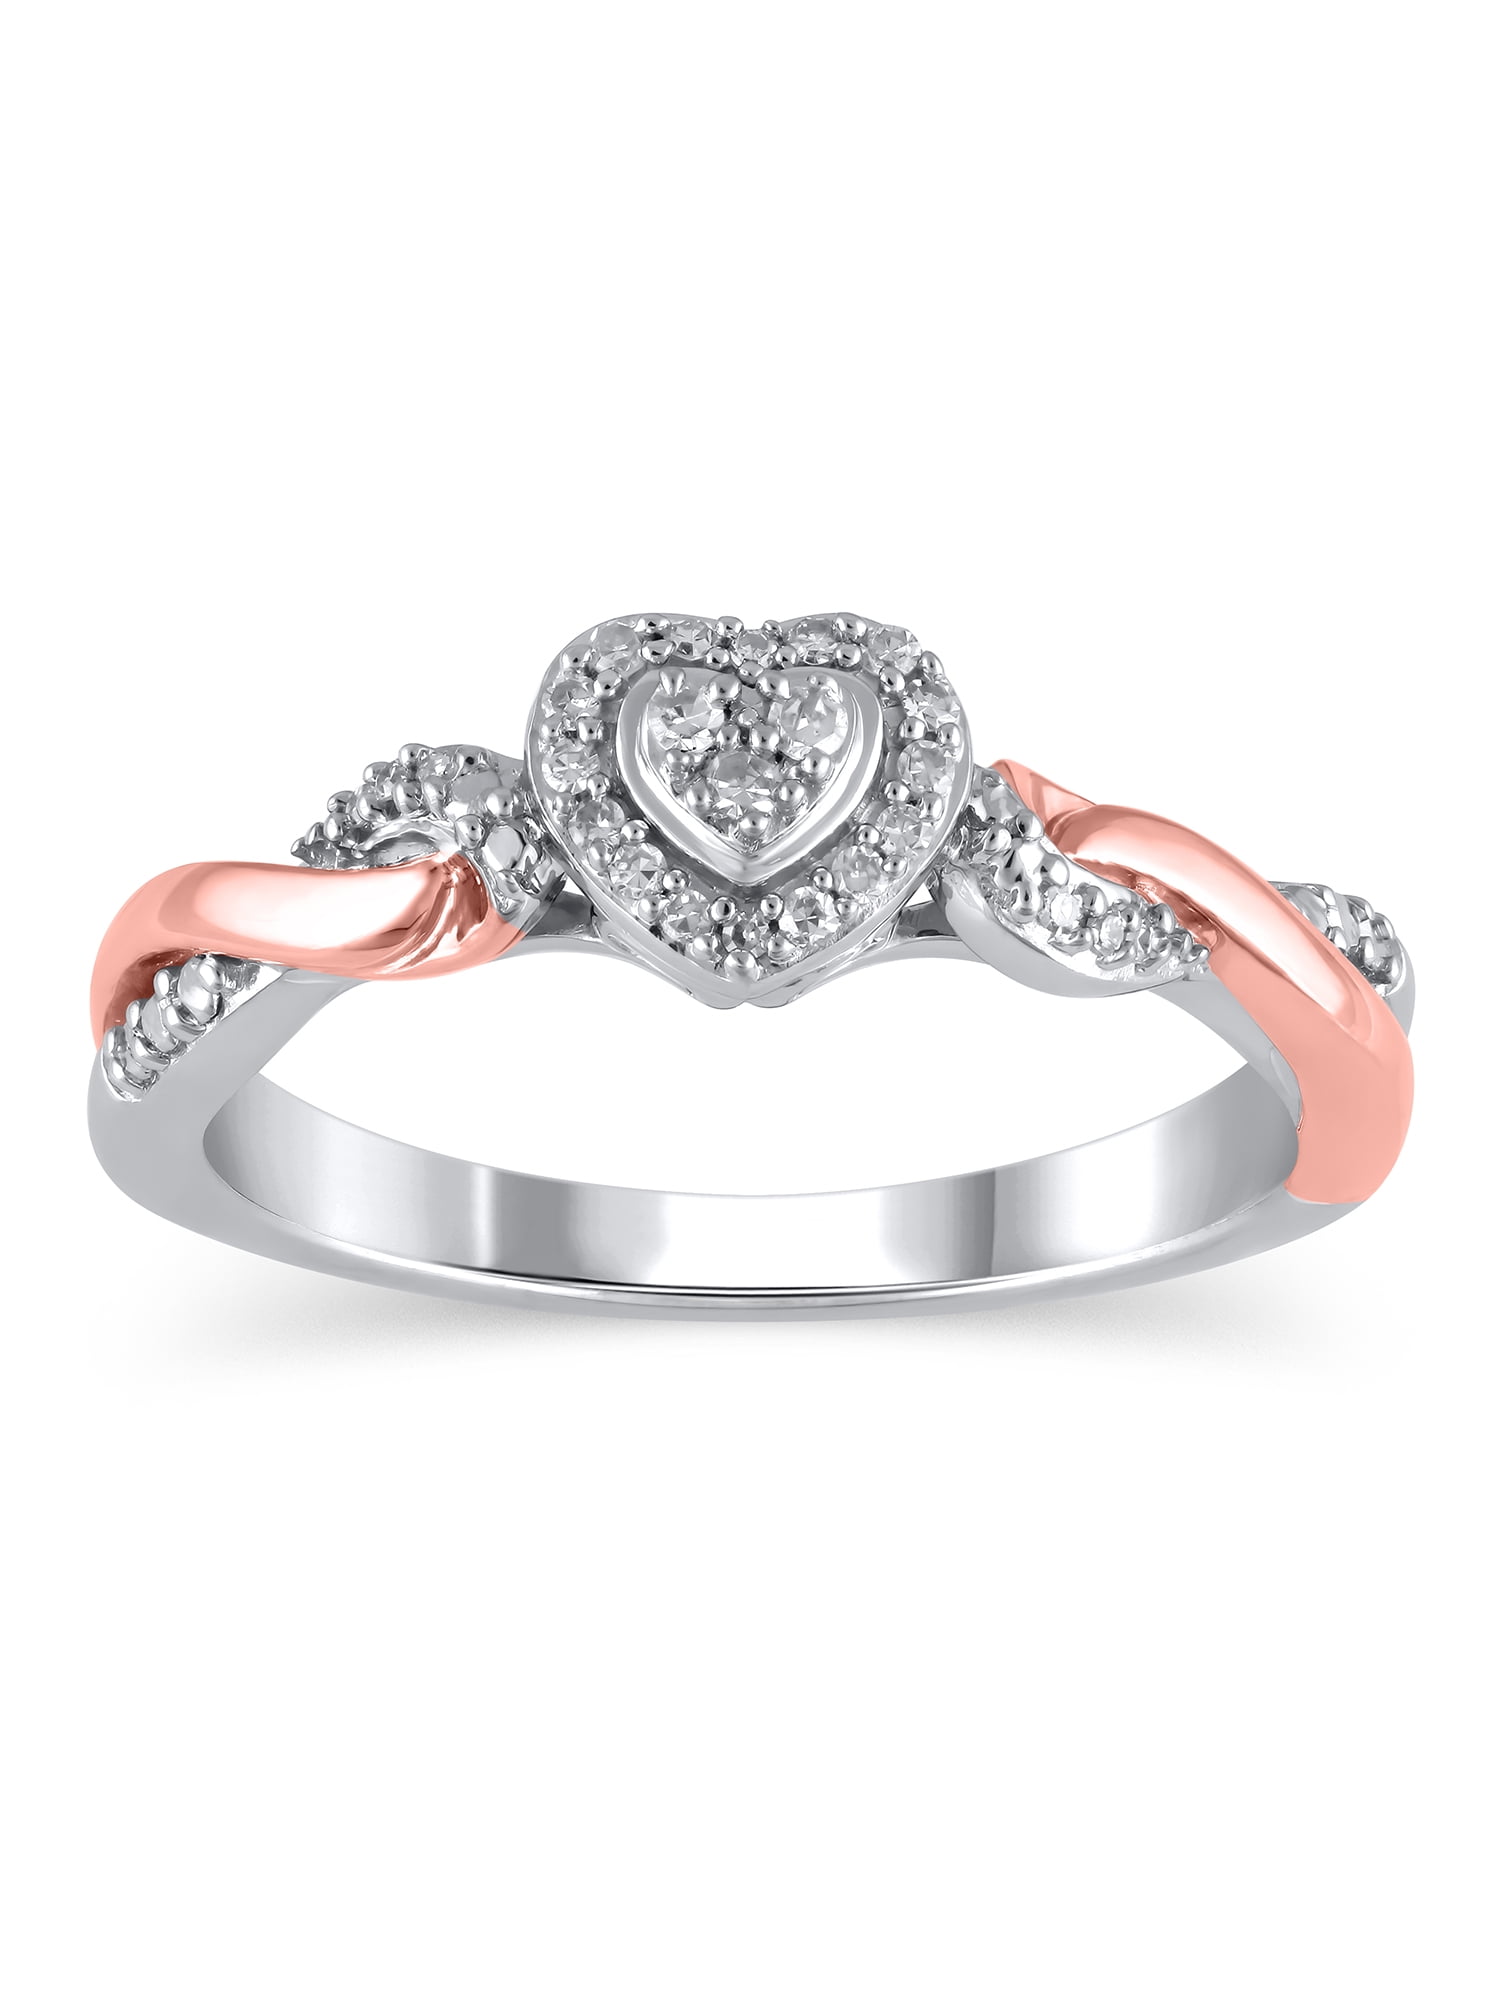 1 10 Carat T W I3 clarity I J color Hold My Hand Diamond Heart Promise Ring in Sterling Silver with 14K Rose Gold Plating Size 4 55e9c805 6eff 40b6 930a 9f64c38bb784.d10ec6b523bc0aeba1b66fbbe3666ecf